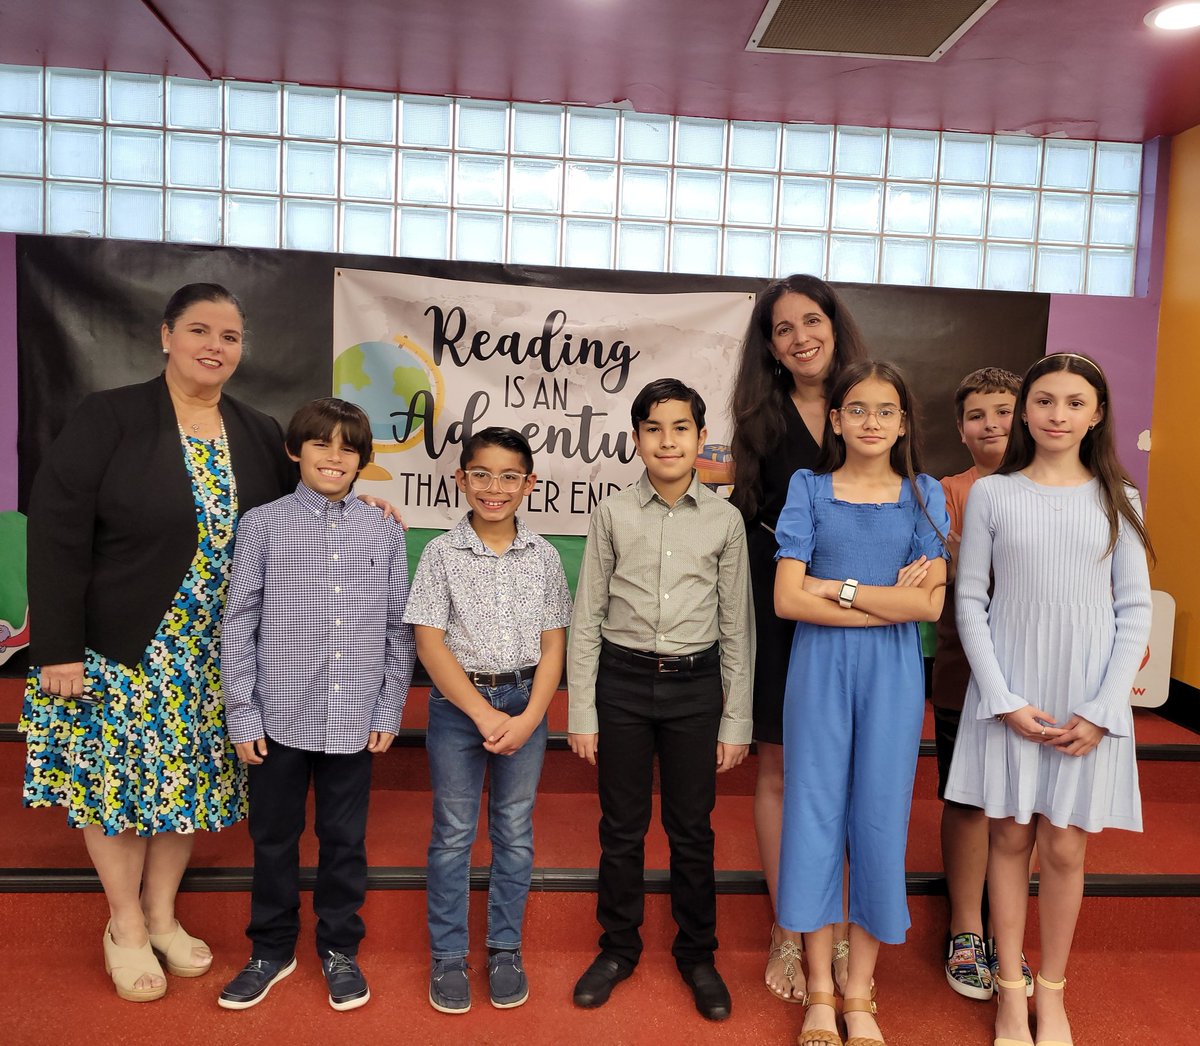 Congratulations to this year's @coralparkelementary Student Council! Thank you, Ms. Yedo for serving as their advisor....we are so proud of them and look forward to their continued success and achievements! @MDCPS @MDCPSCentral @MDCPSAcademics 
@MDCPSSocStudies 
#civics